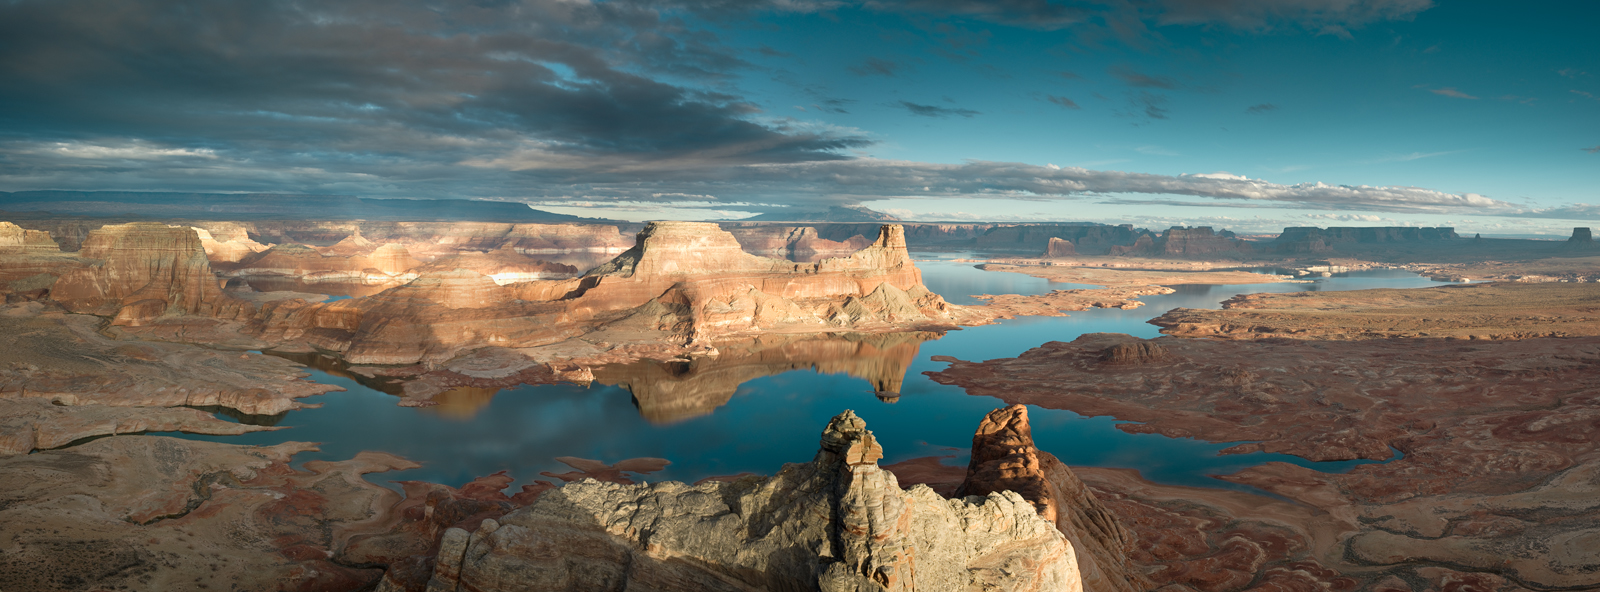 Panoramic, landscape, photography, Lake Powell, evening light, shadows, sunset, panoramique, paysage, ombres